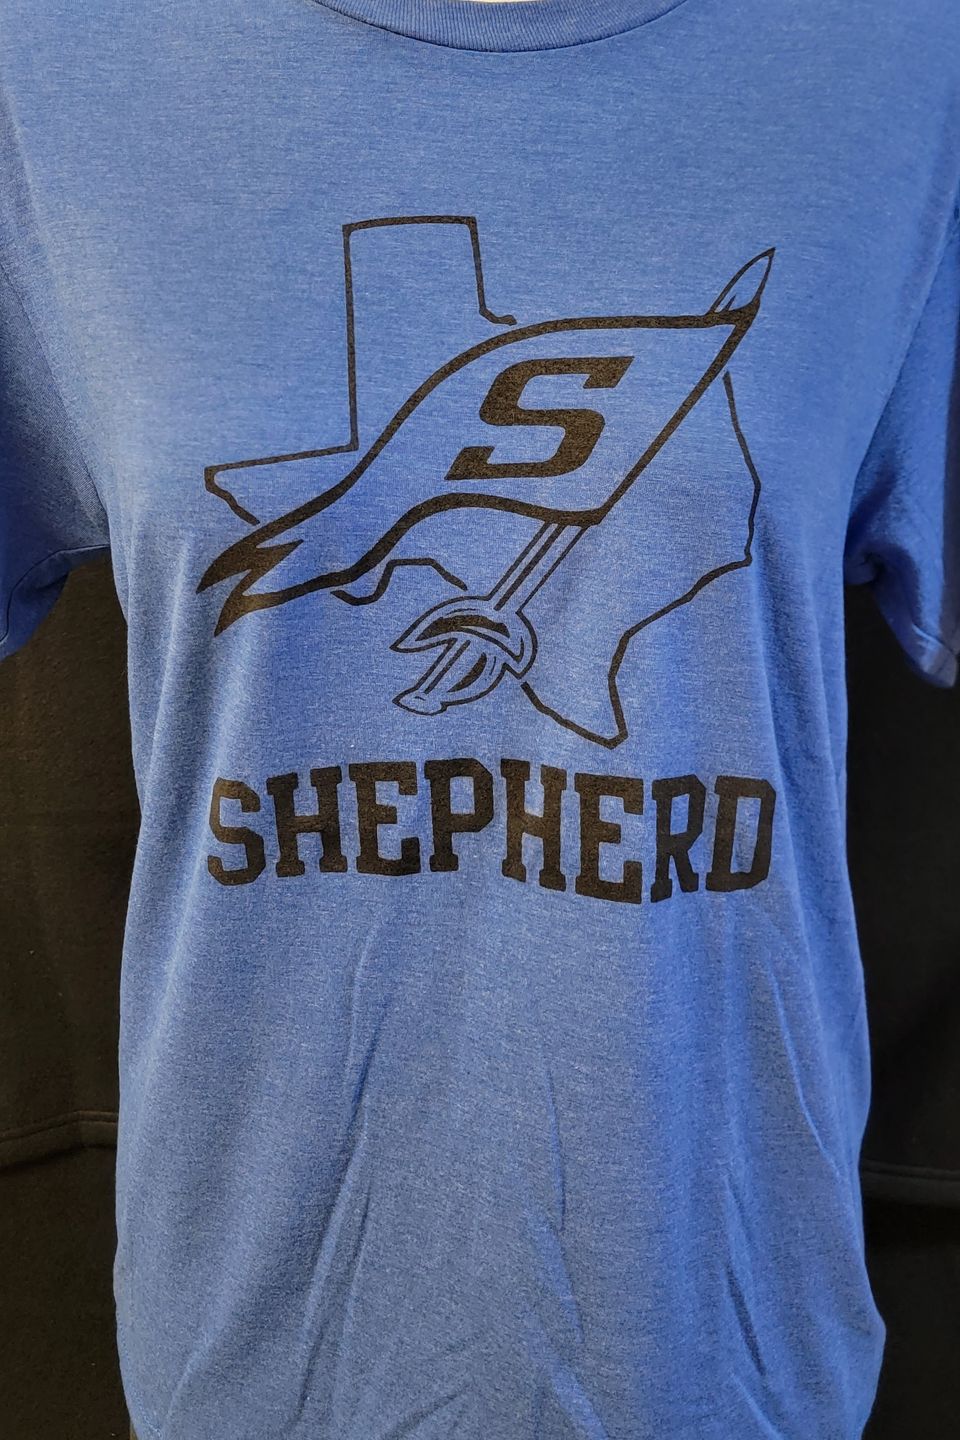 Example of Direct to Film (DTF) - Shepherd High School name and logo on blue t-shirt.